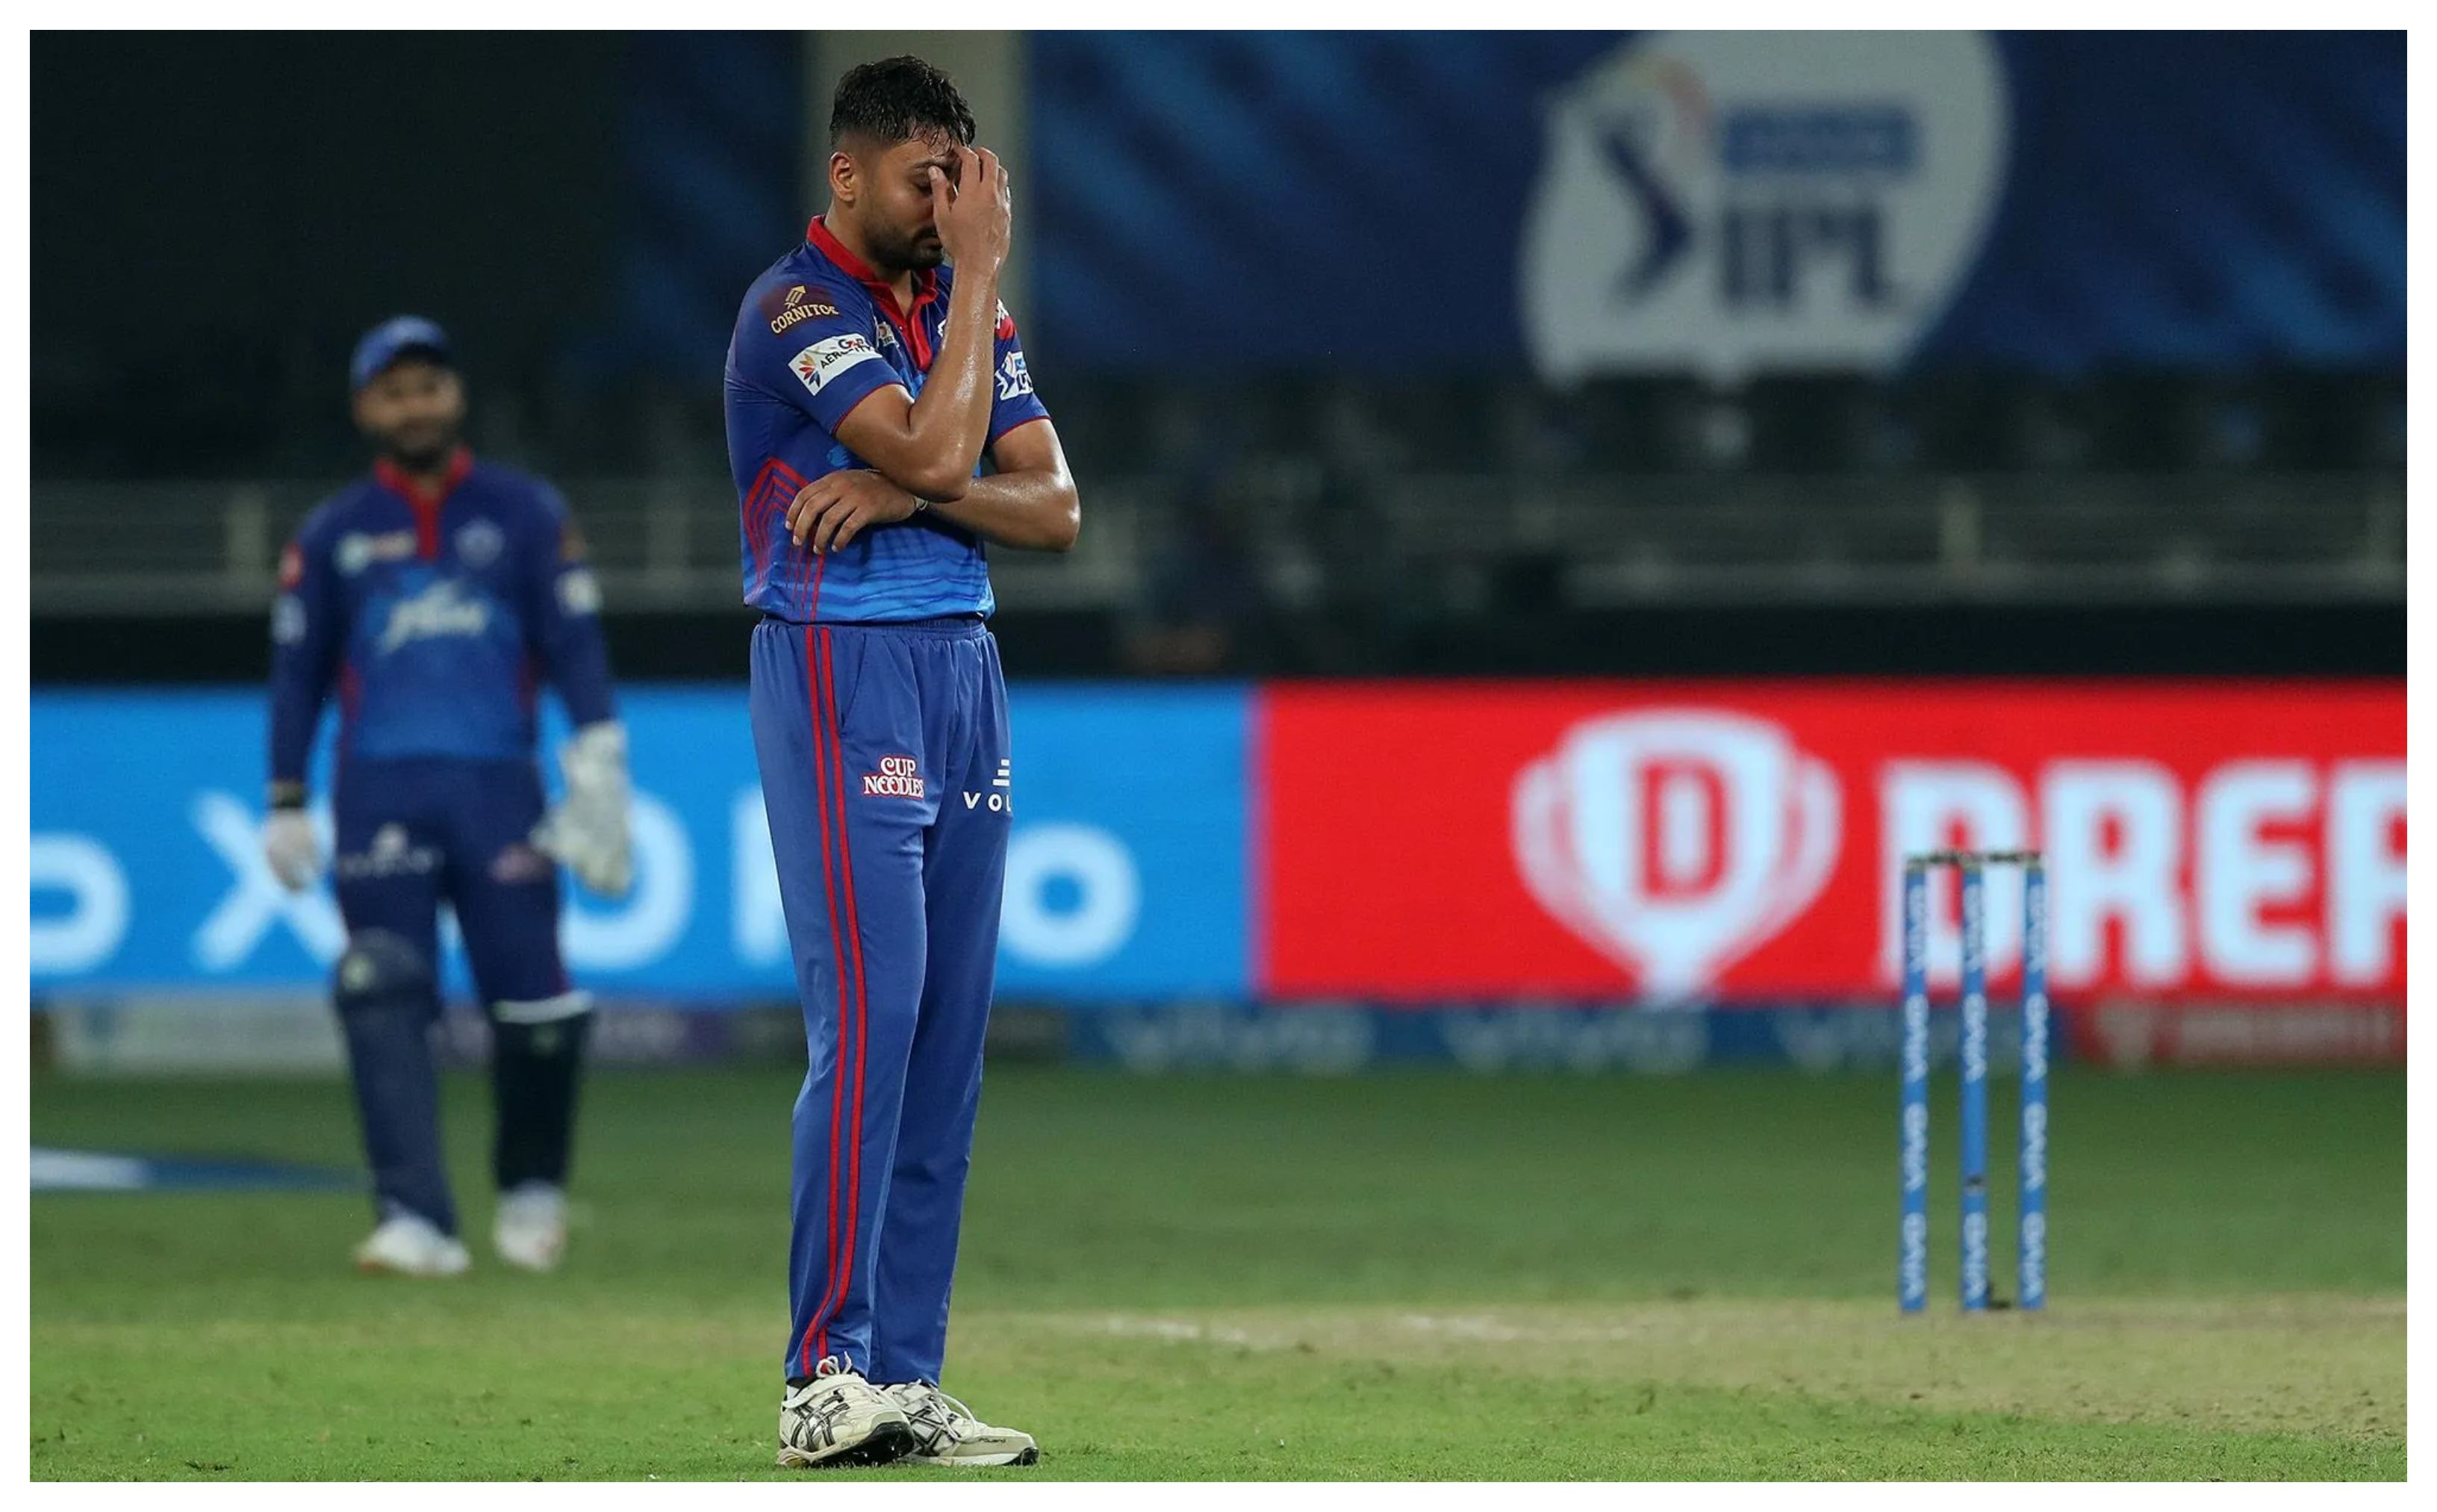 DC suffered a last ball defeat against RCB | BCCI/IPL